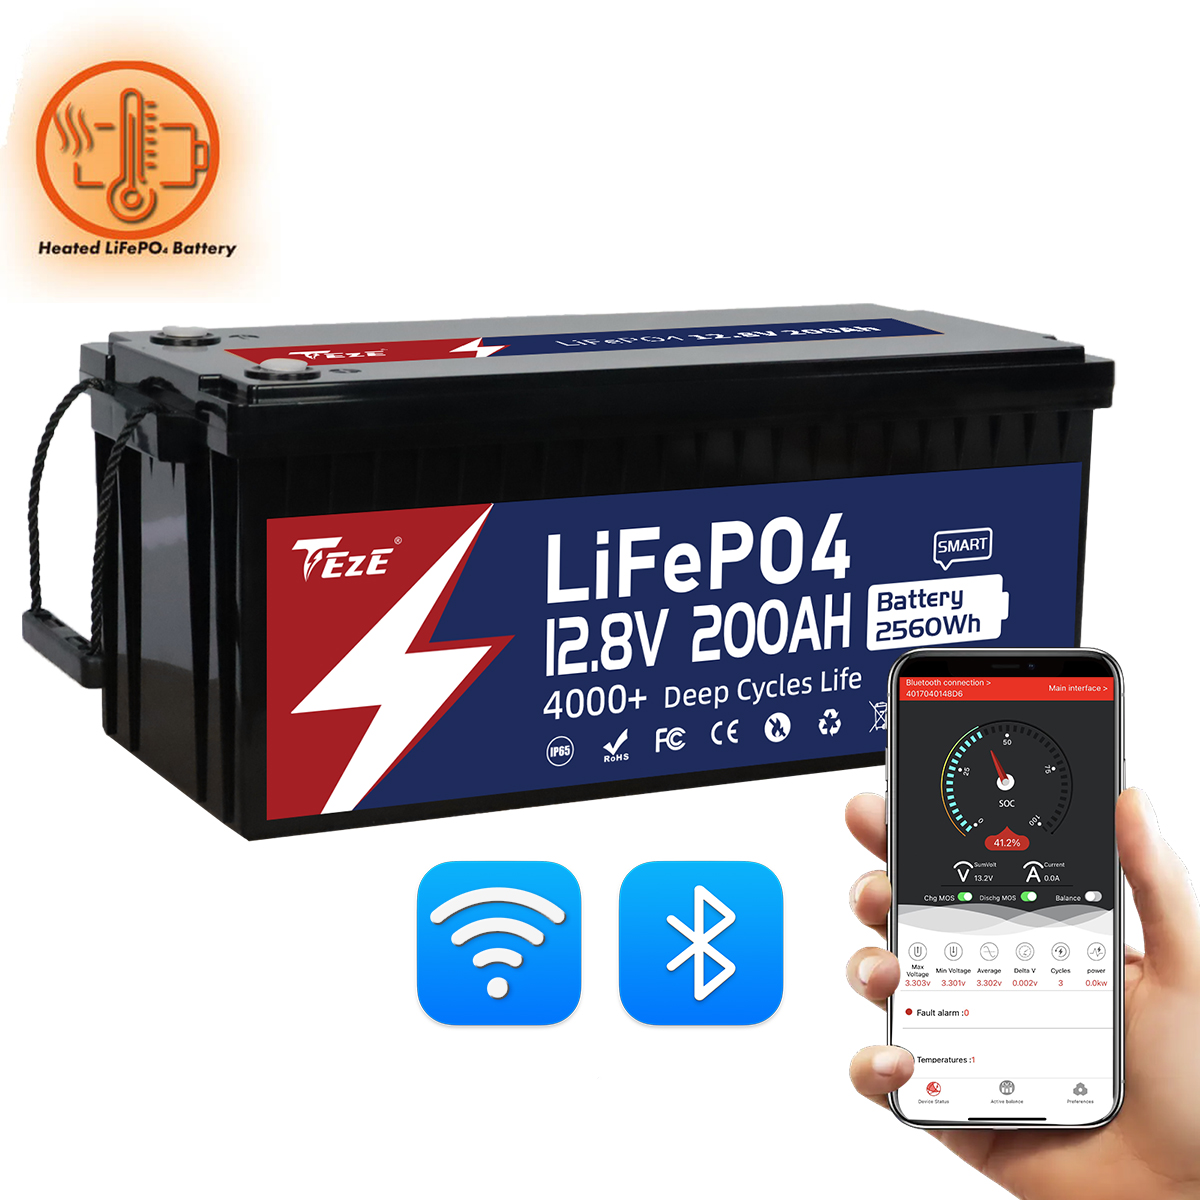 New Add WiFi-TezePower 12V 200Ah LiFePO4 Battery with WiFi and Bluetooth, Self-heating and Active Balancer, Built-in 200A Daly BMS(WiFi Built-in Version)-TezePower